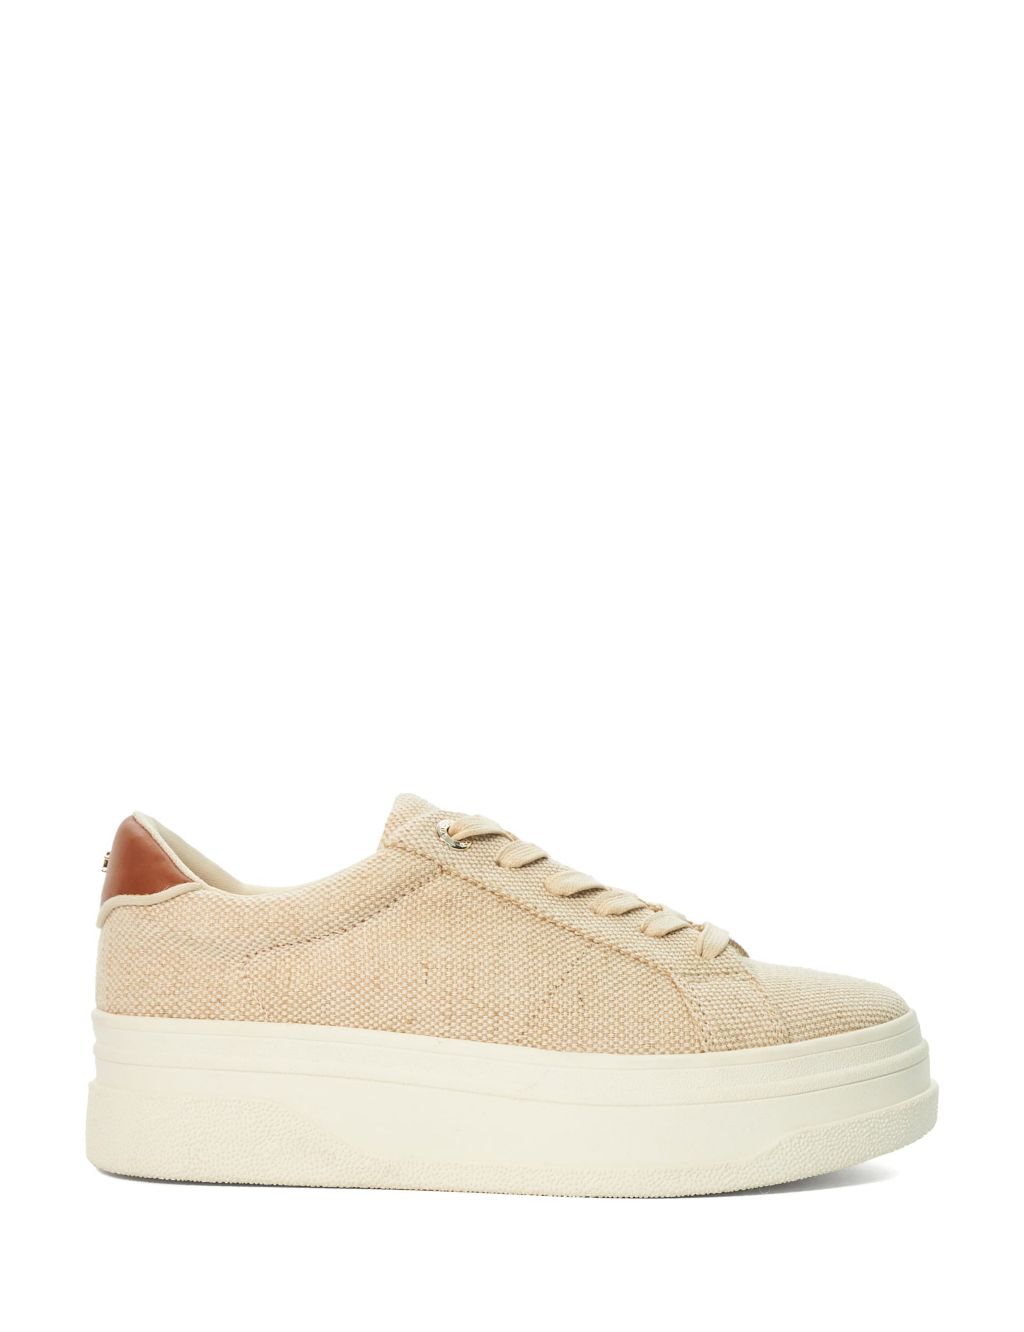 Lace Up Flatform Trainers